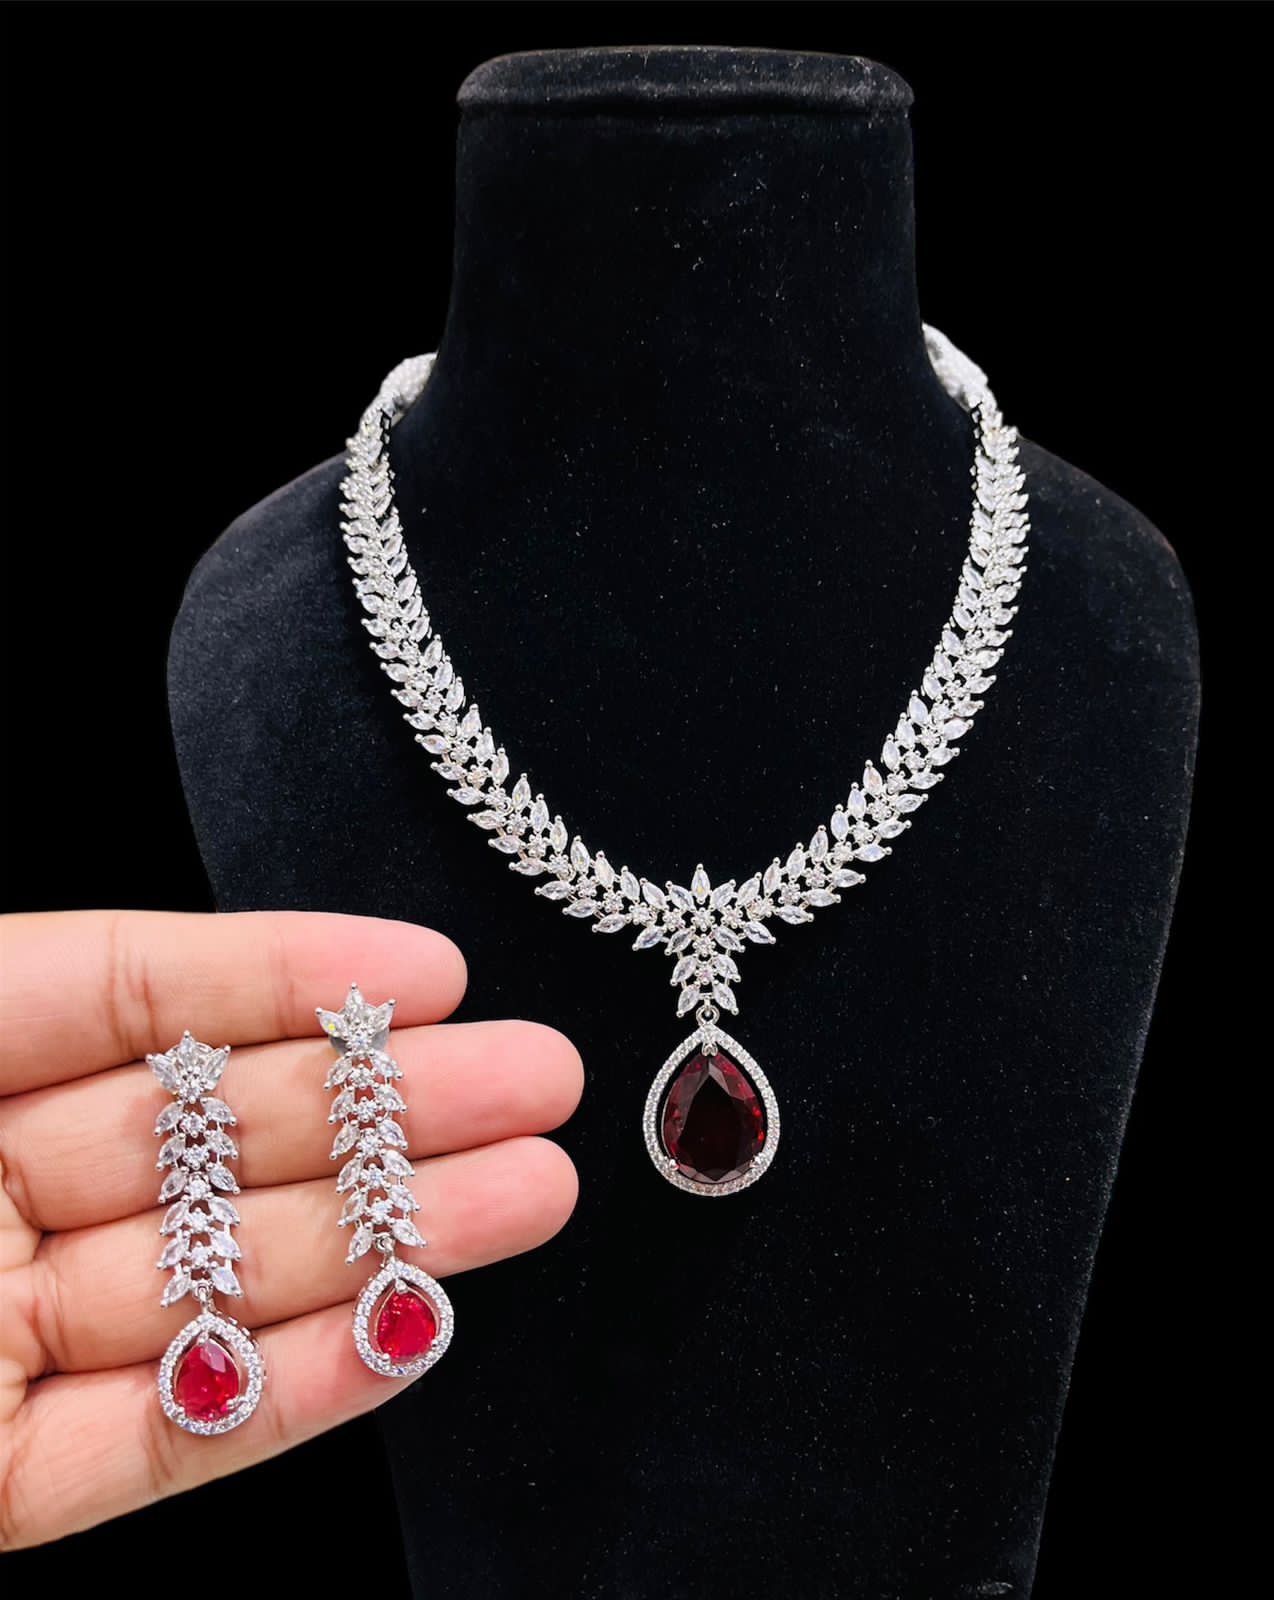 High quality AD Necklace set